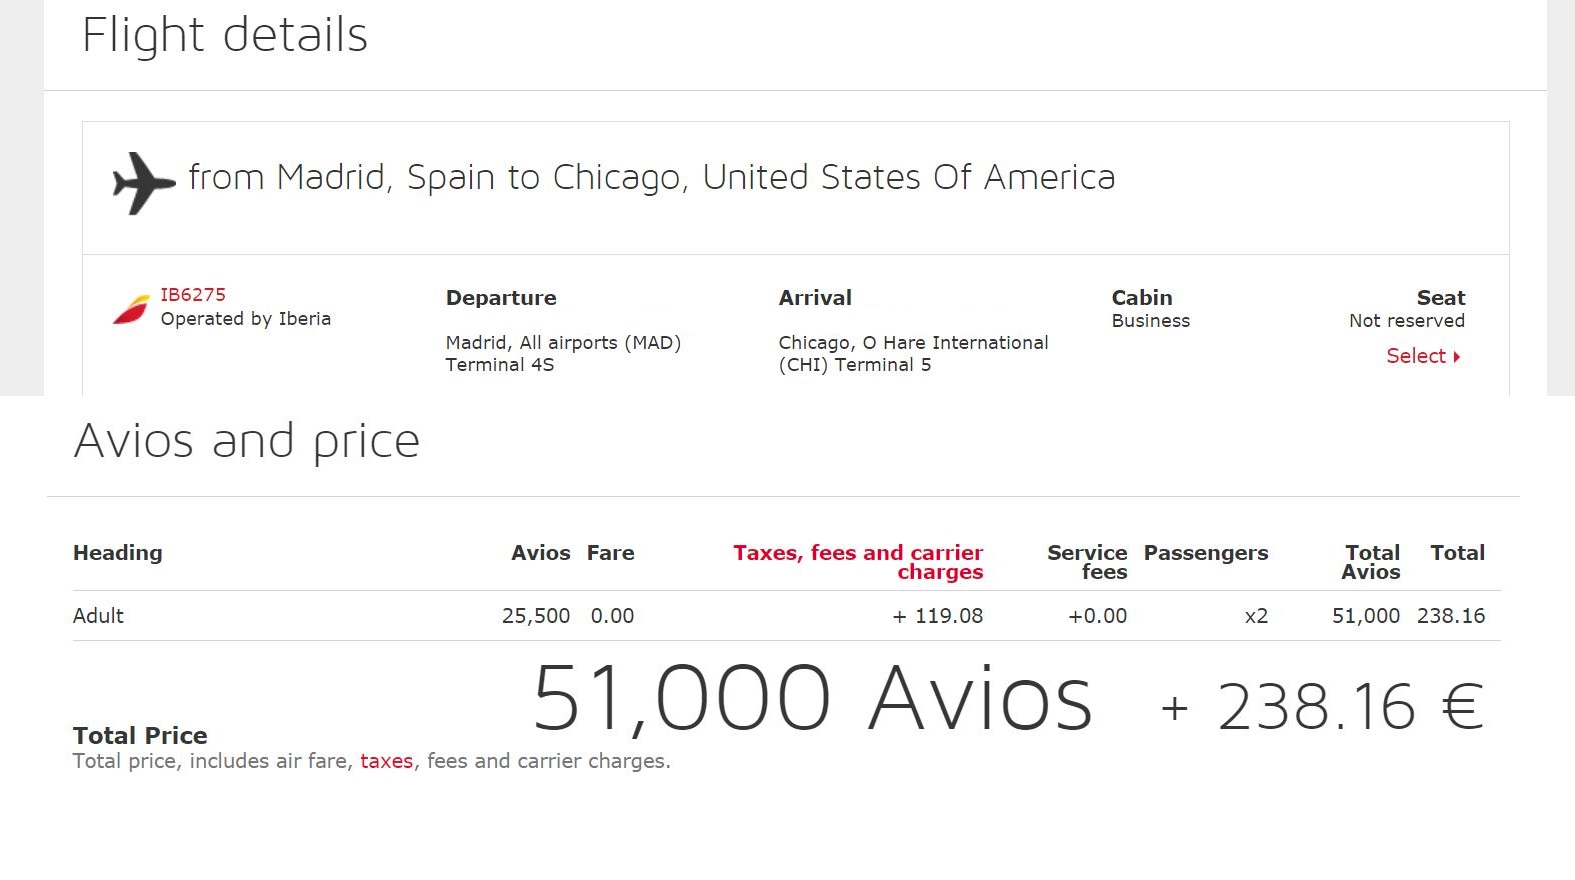 In keeping with the theme of being obnoxious, I have to share the great news that I booked a business class flight on Iberia from Madrid to Chicago.